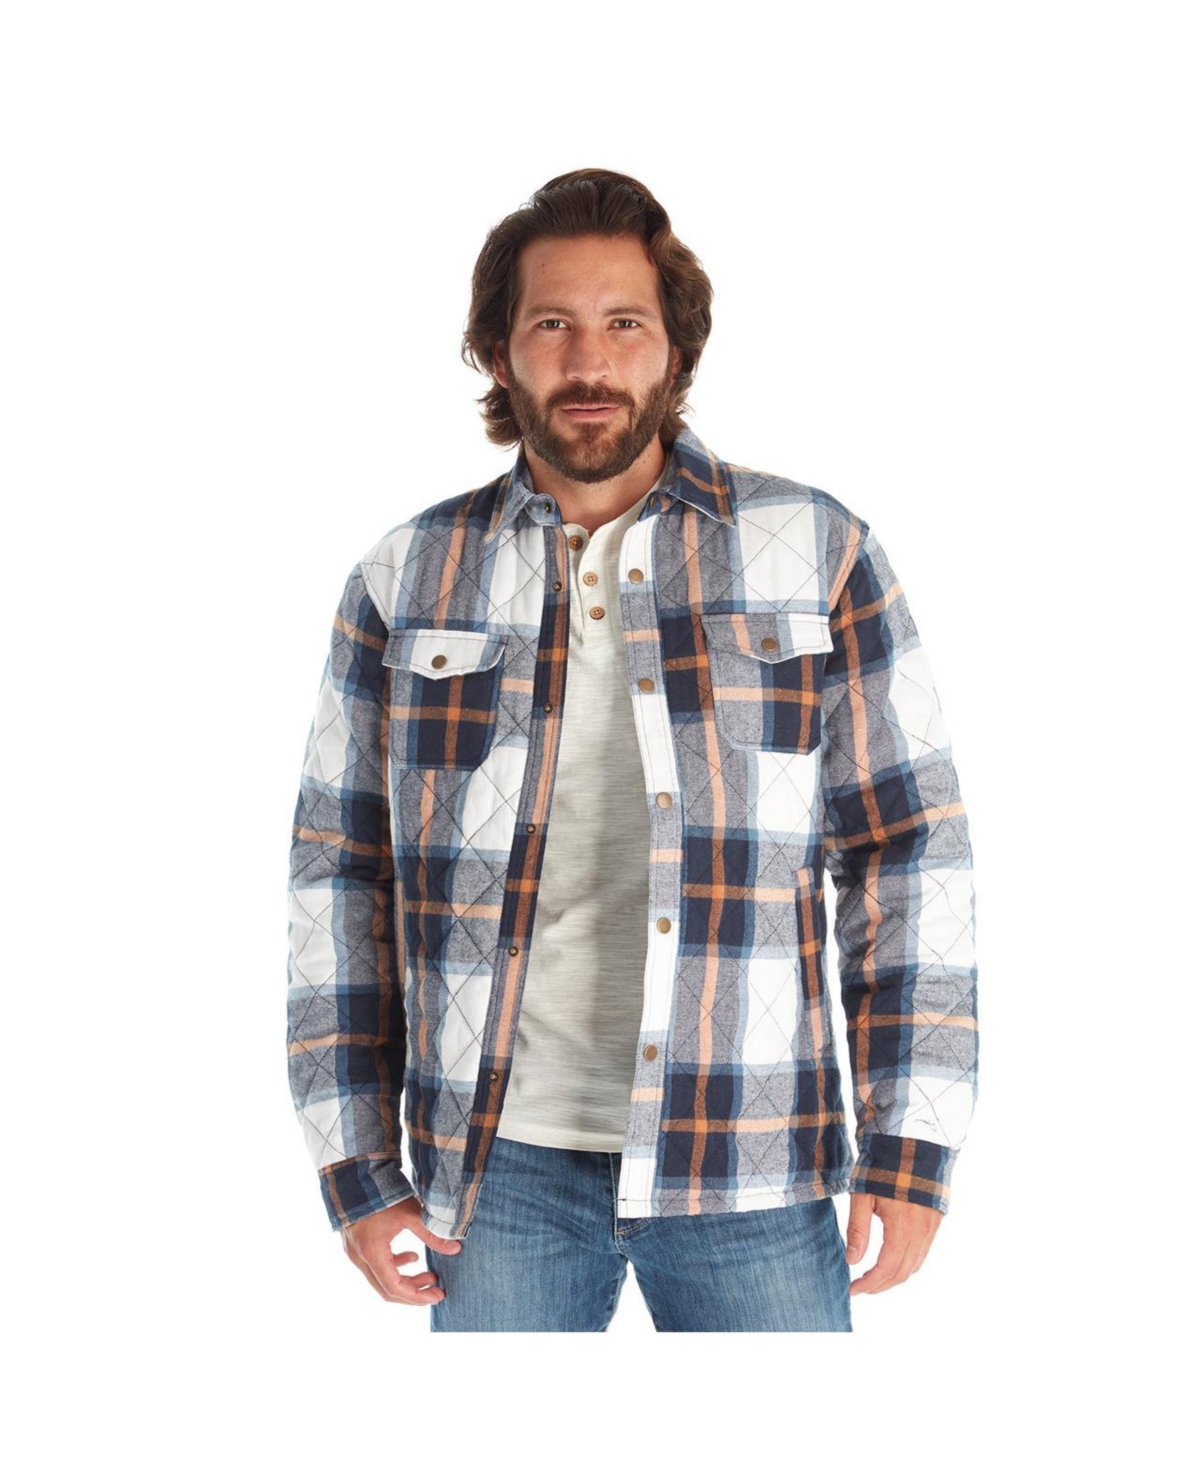 Clothing Men's Heavy Quilted Plaid Shirt Jacket - Navy